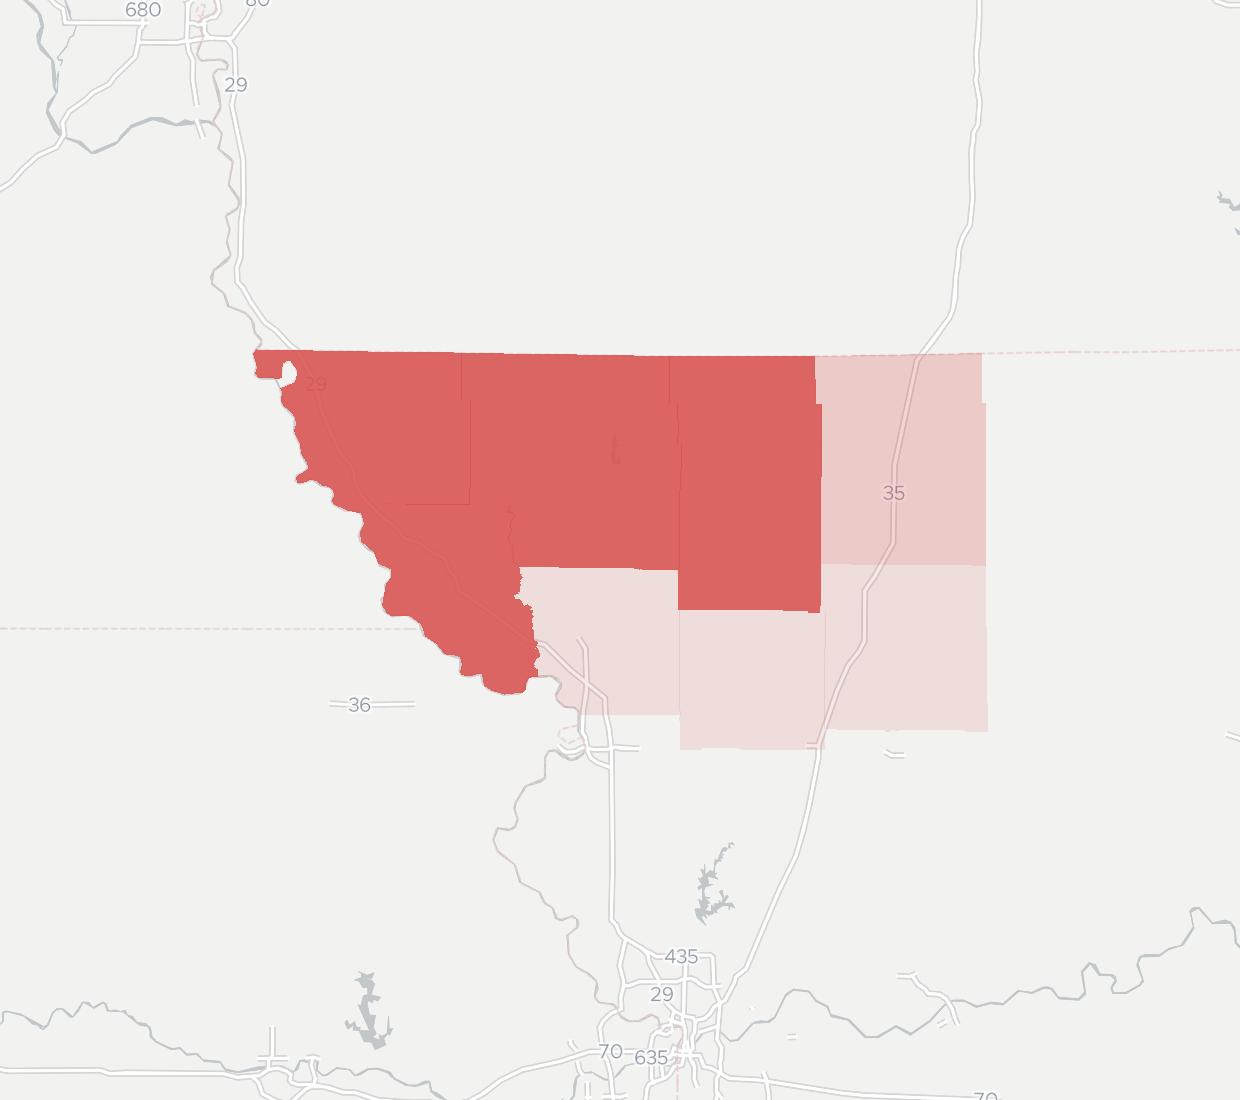 Northwest Missouri Cellular Availability Map. Click for interactive map.